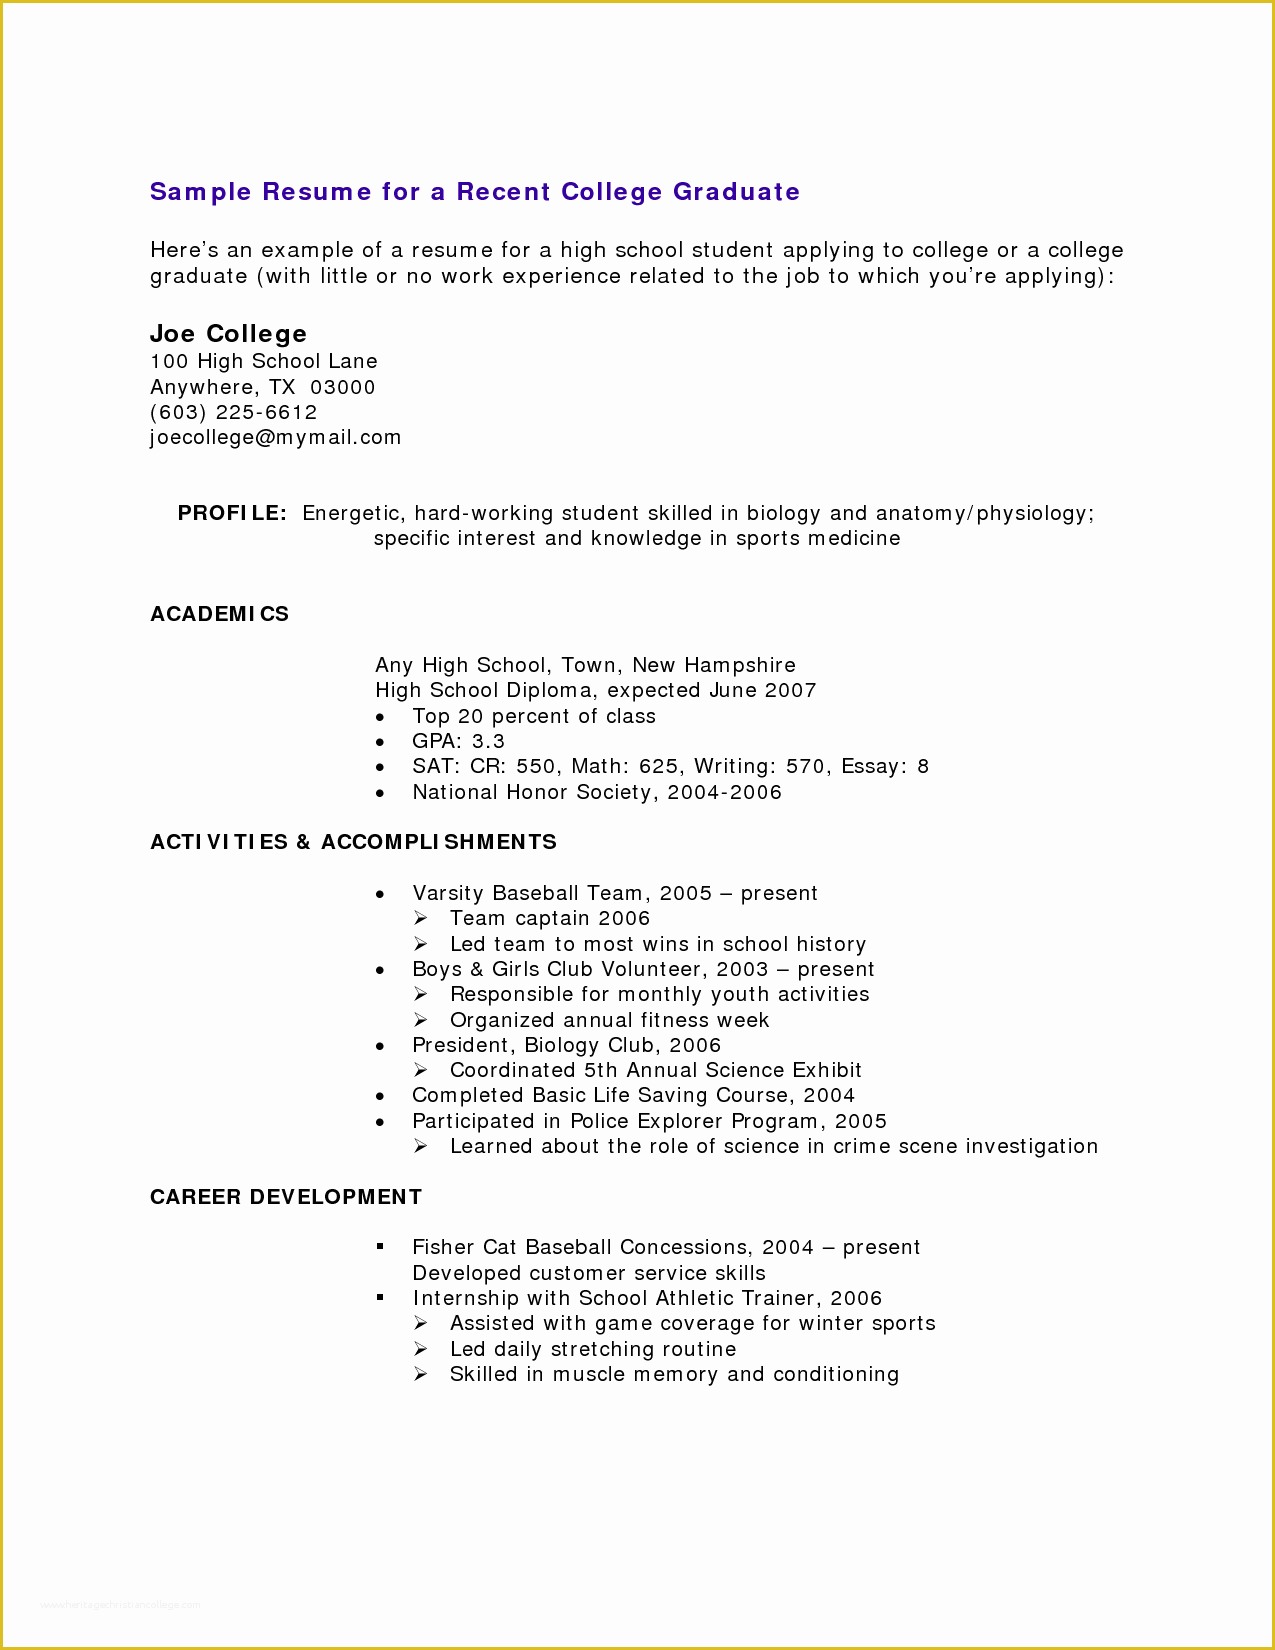 Resume Templates Free for High School Students Of Resumes Samples for High School Students with No